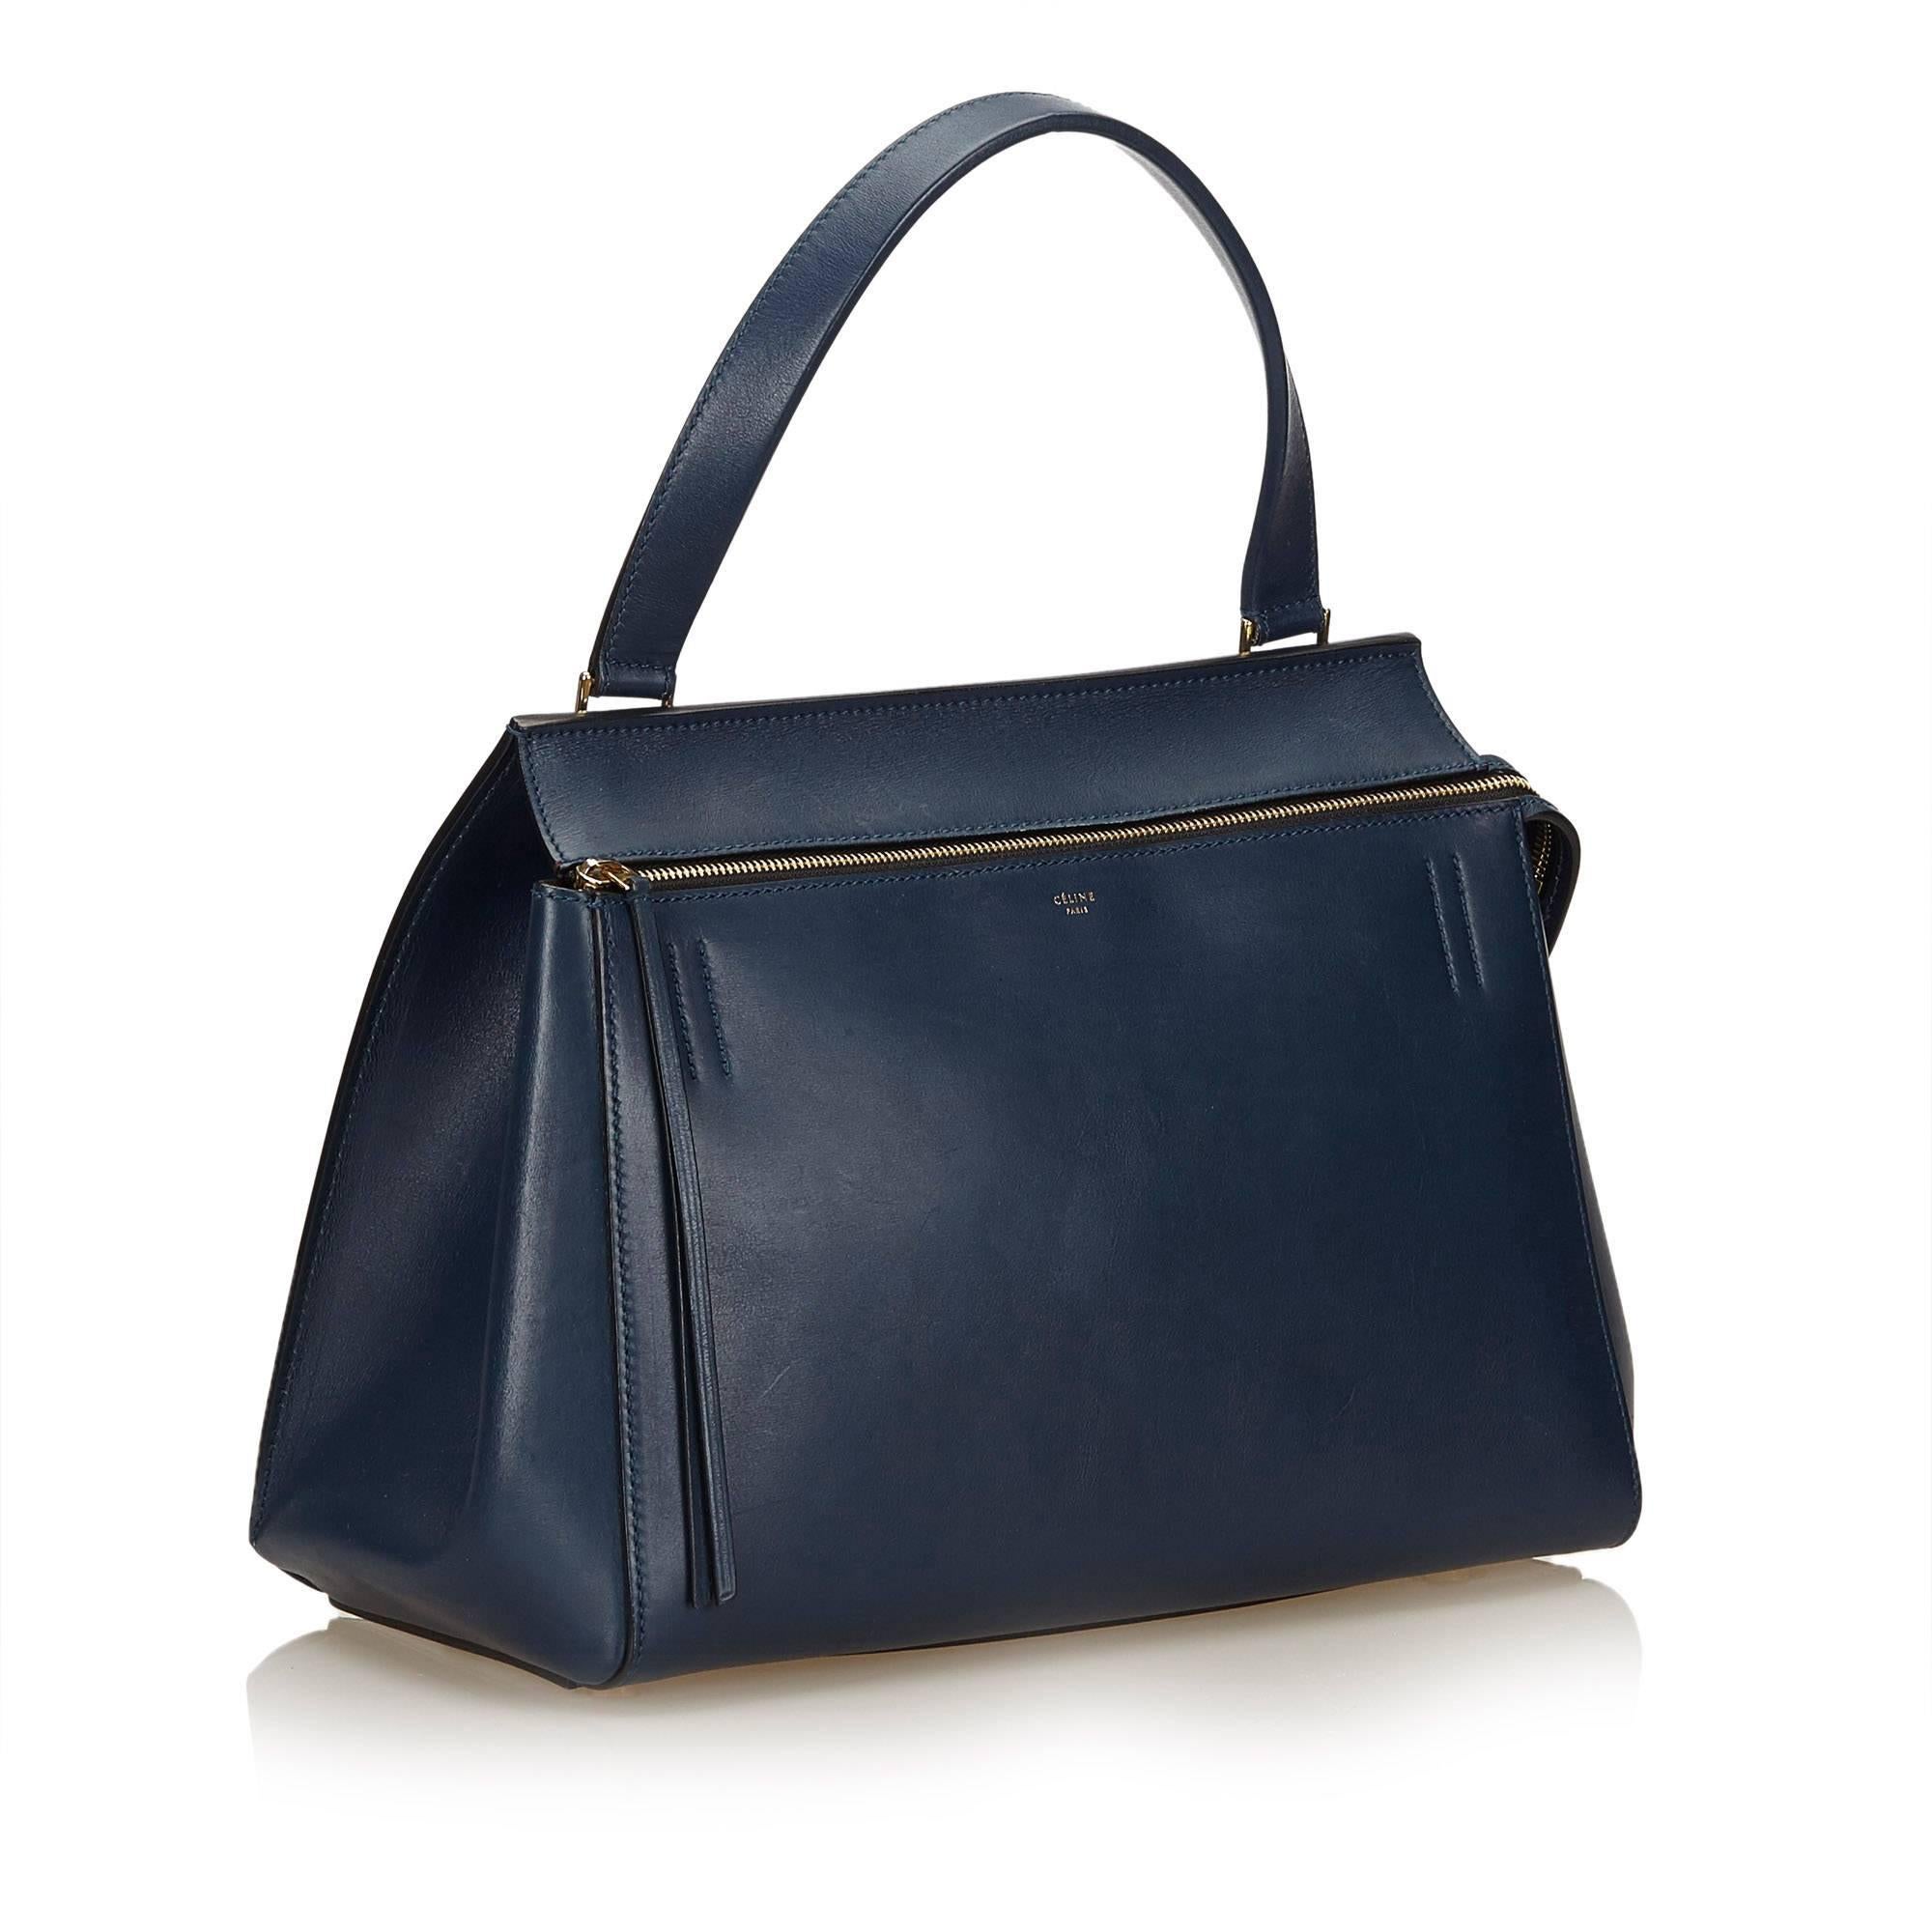 The Large Edge Bag features a leather body, exterior front zip pocket, back slip pocket, flat leather handles, top zip closure, and interior slip pockets. 

It carries a B+ condition rating.

Dimensions: 
Length 27 cm
Width 36 cm
Depth 18 cm
Hand